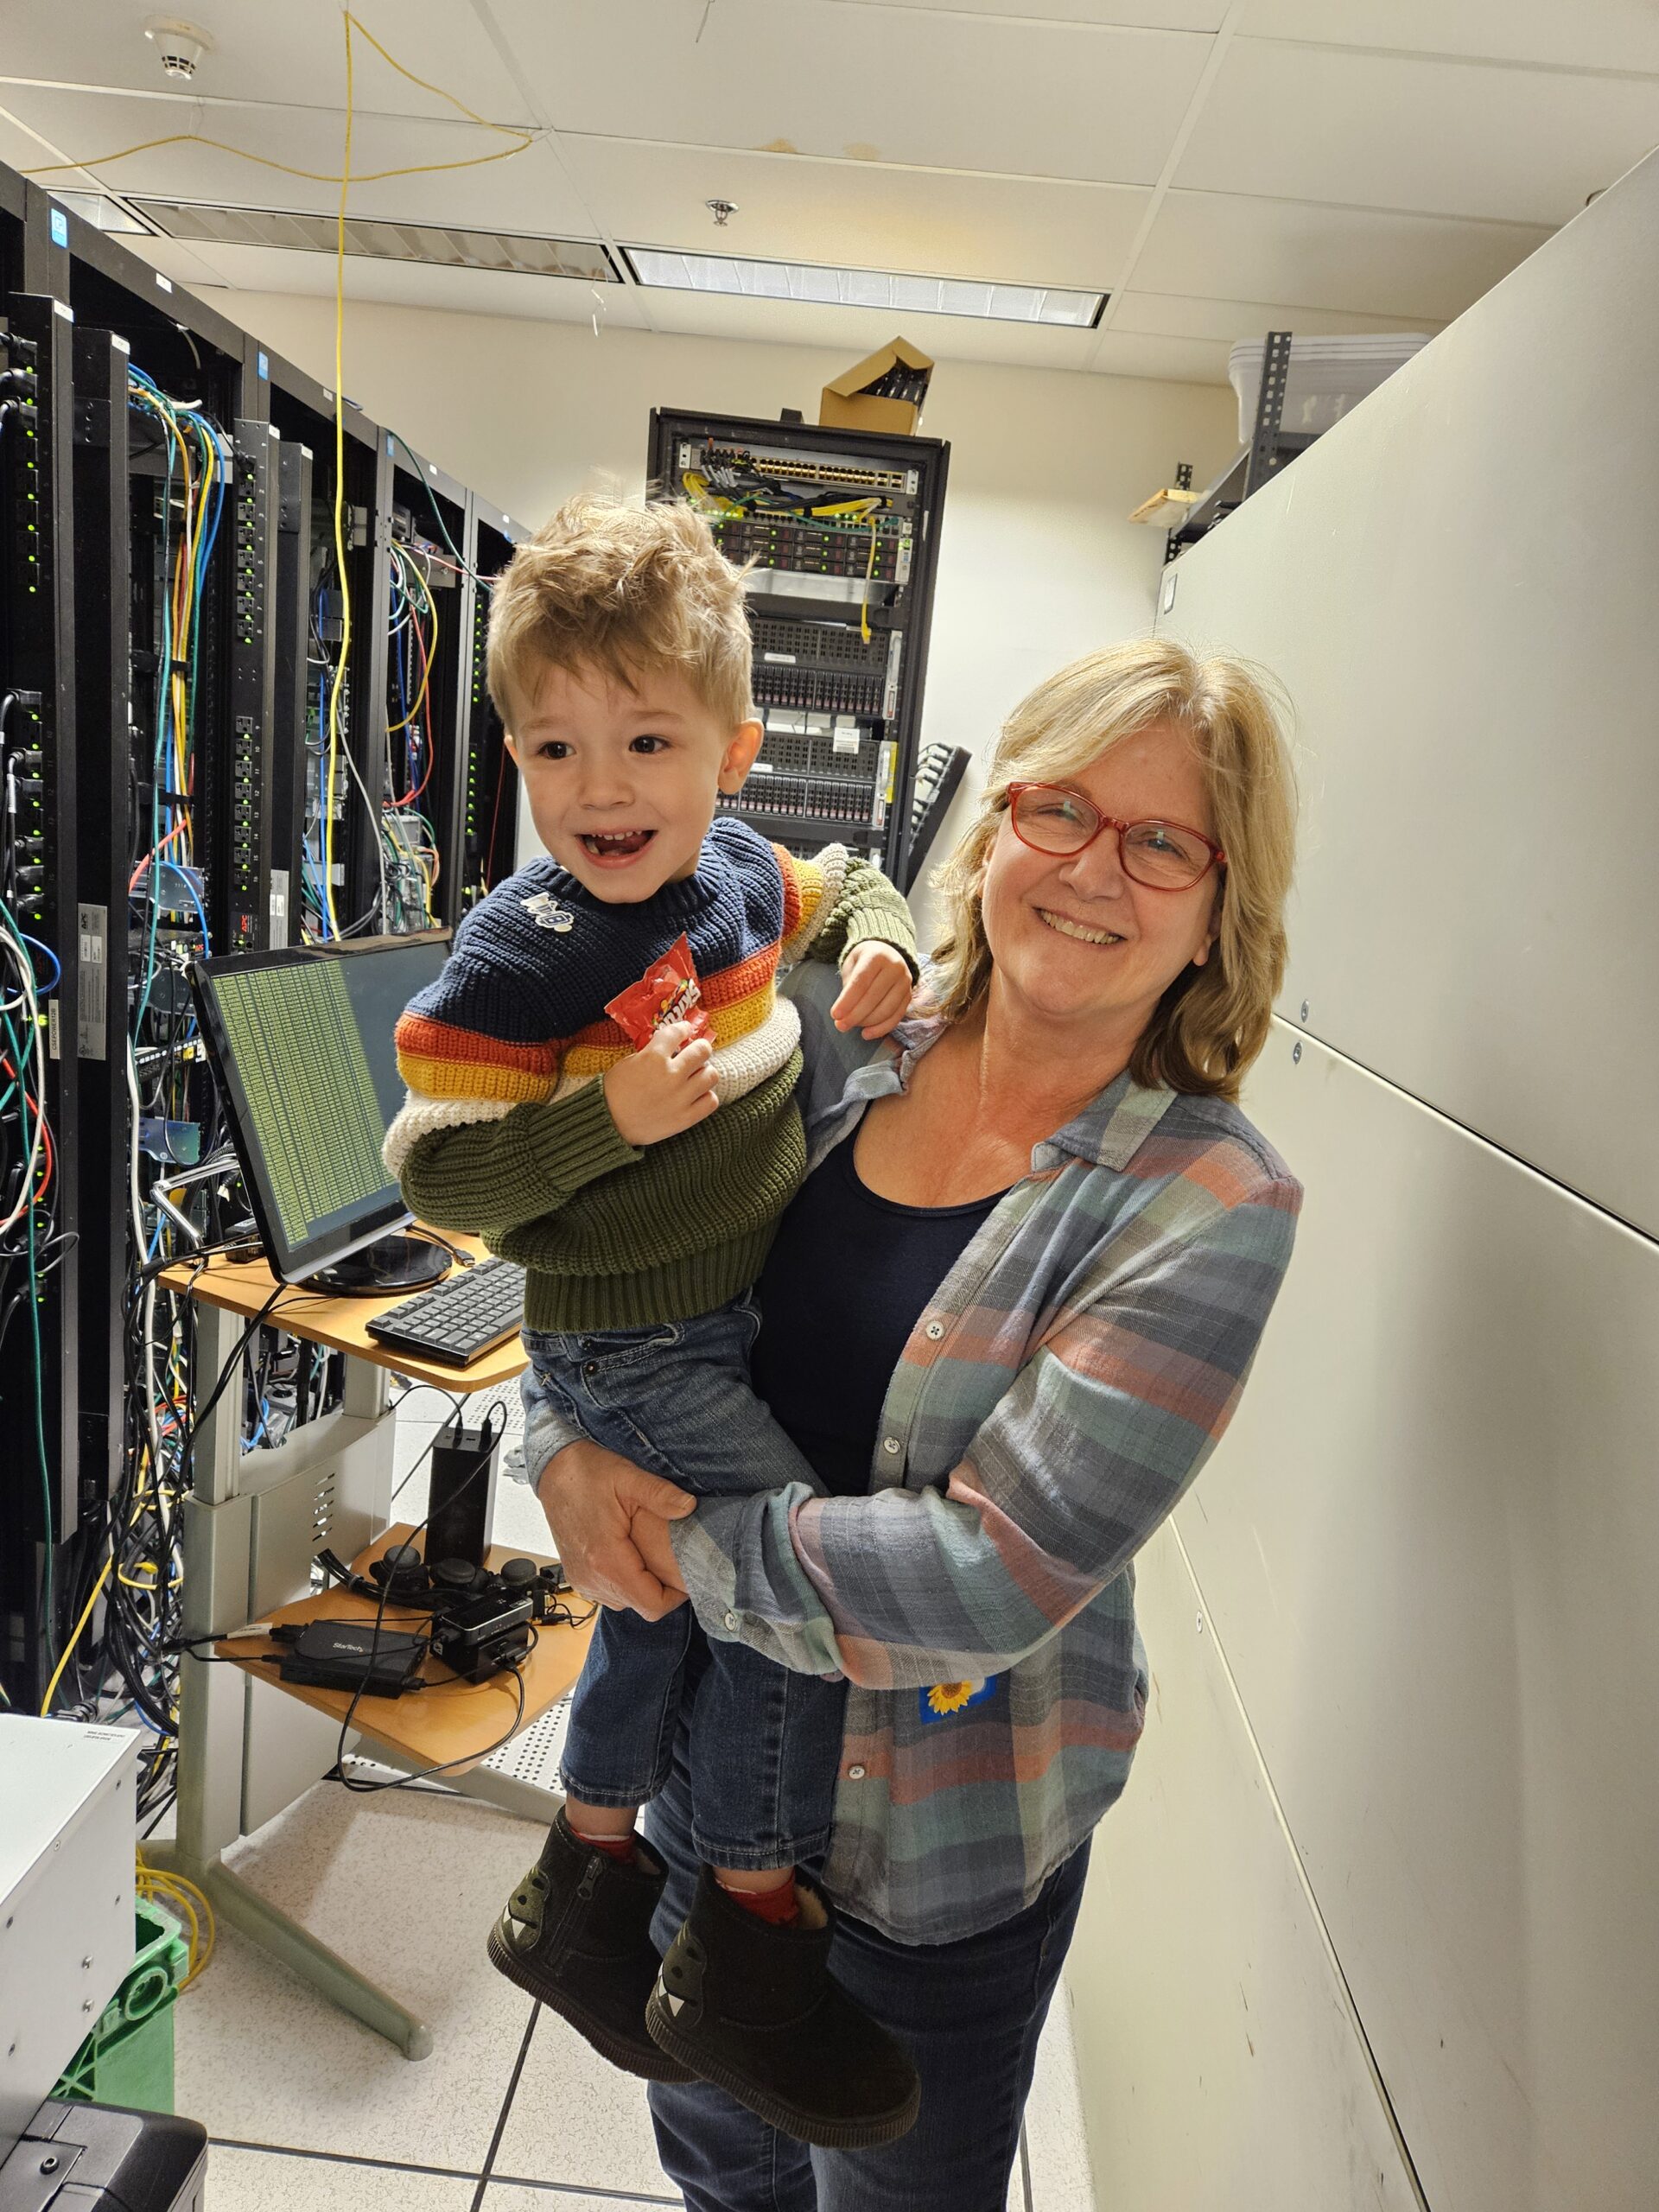 A blonde woman stands, holding a young child. They are both smiling at the camera. Behind them is a row of computer servers.